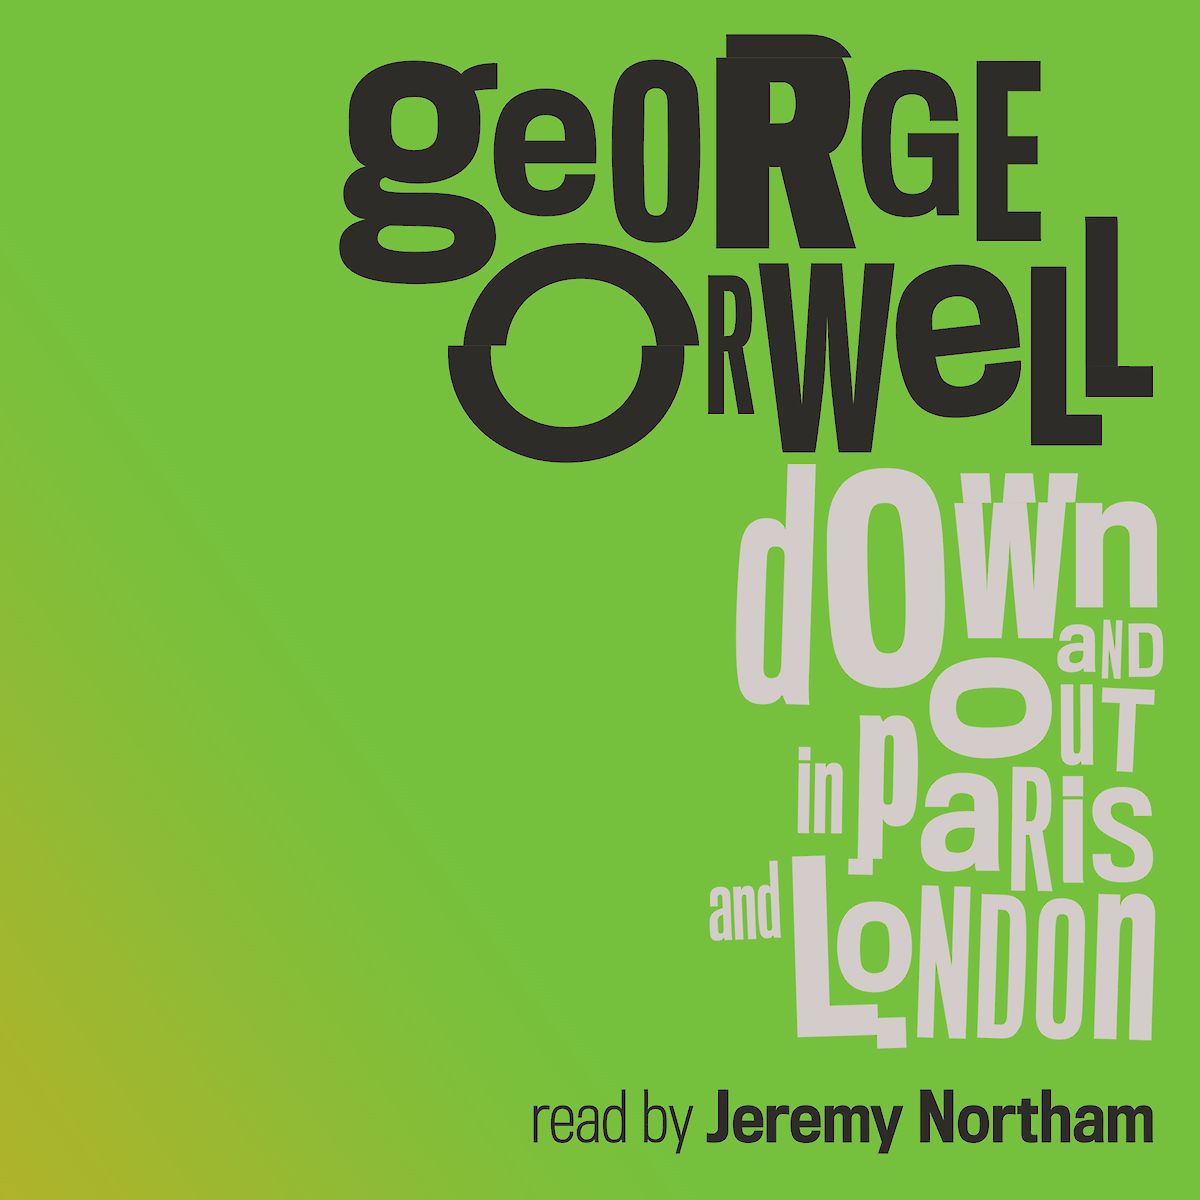 down and out in paris and london by george orwell